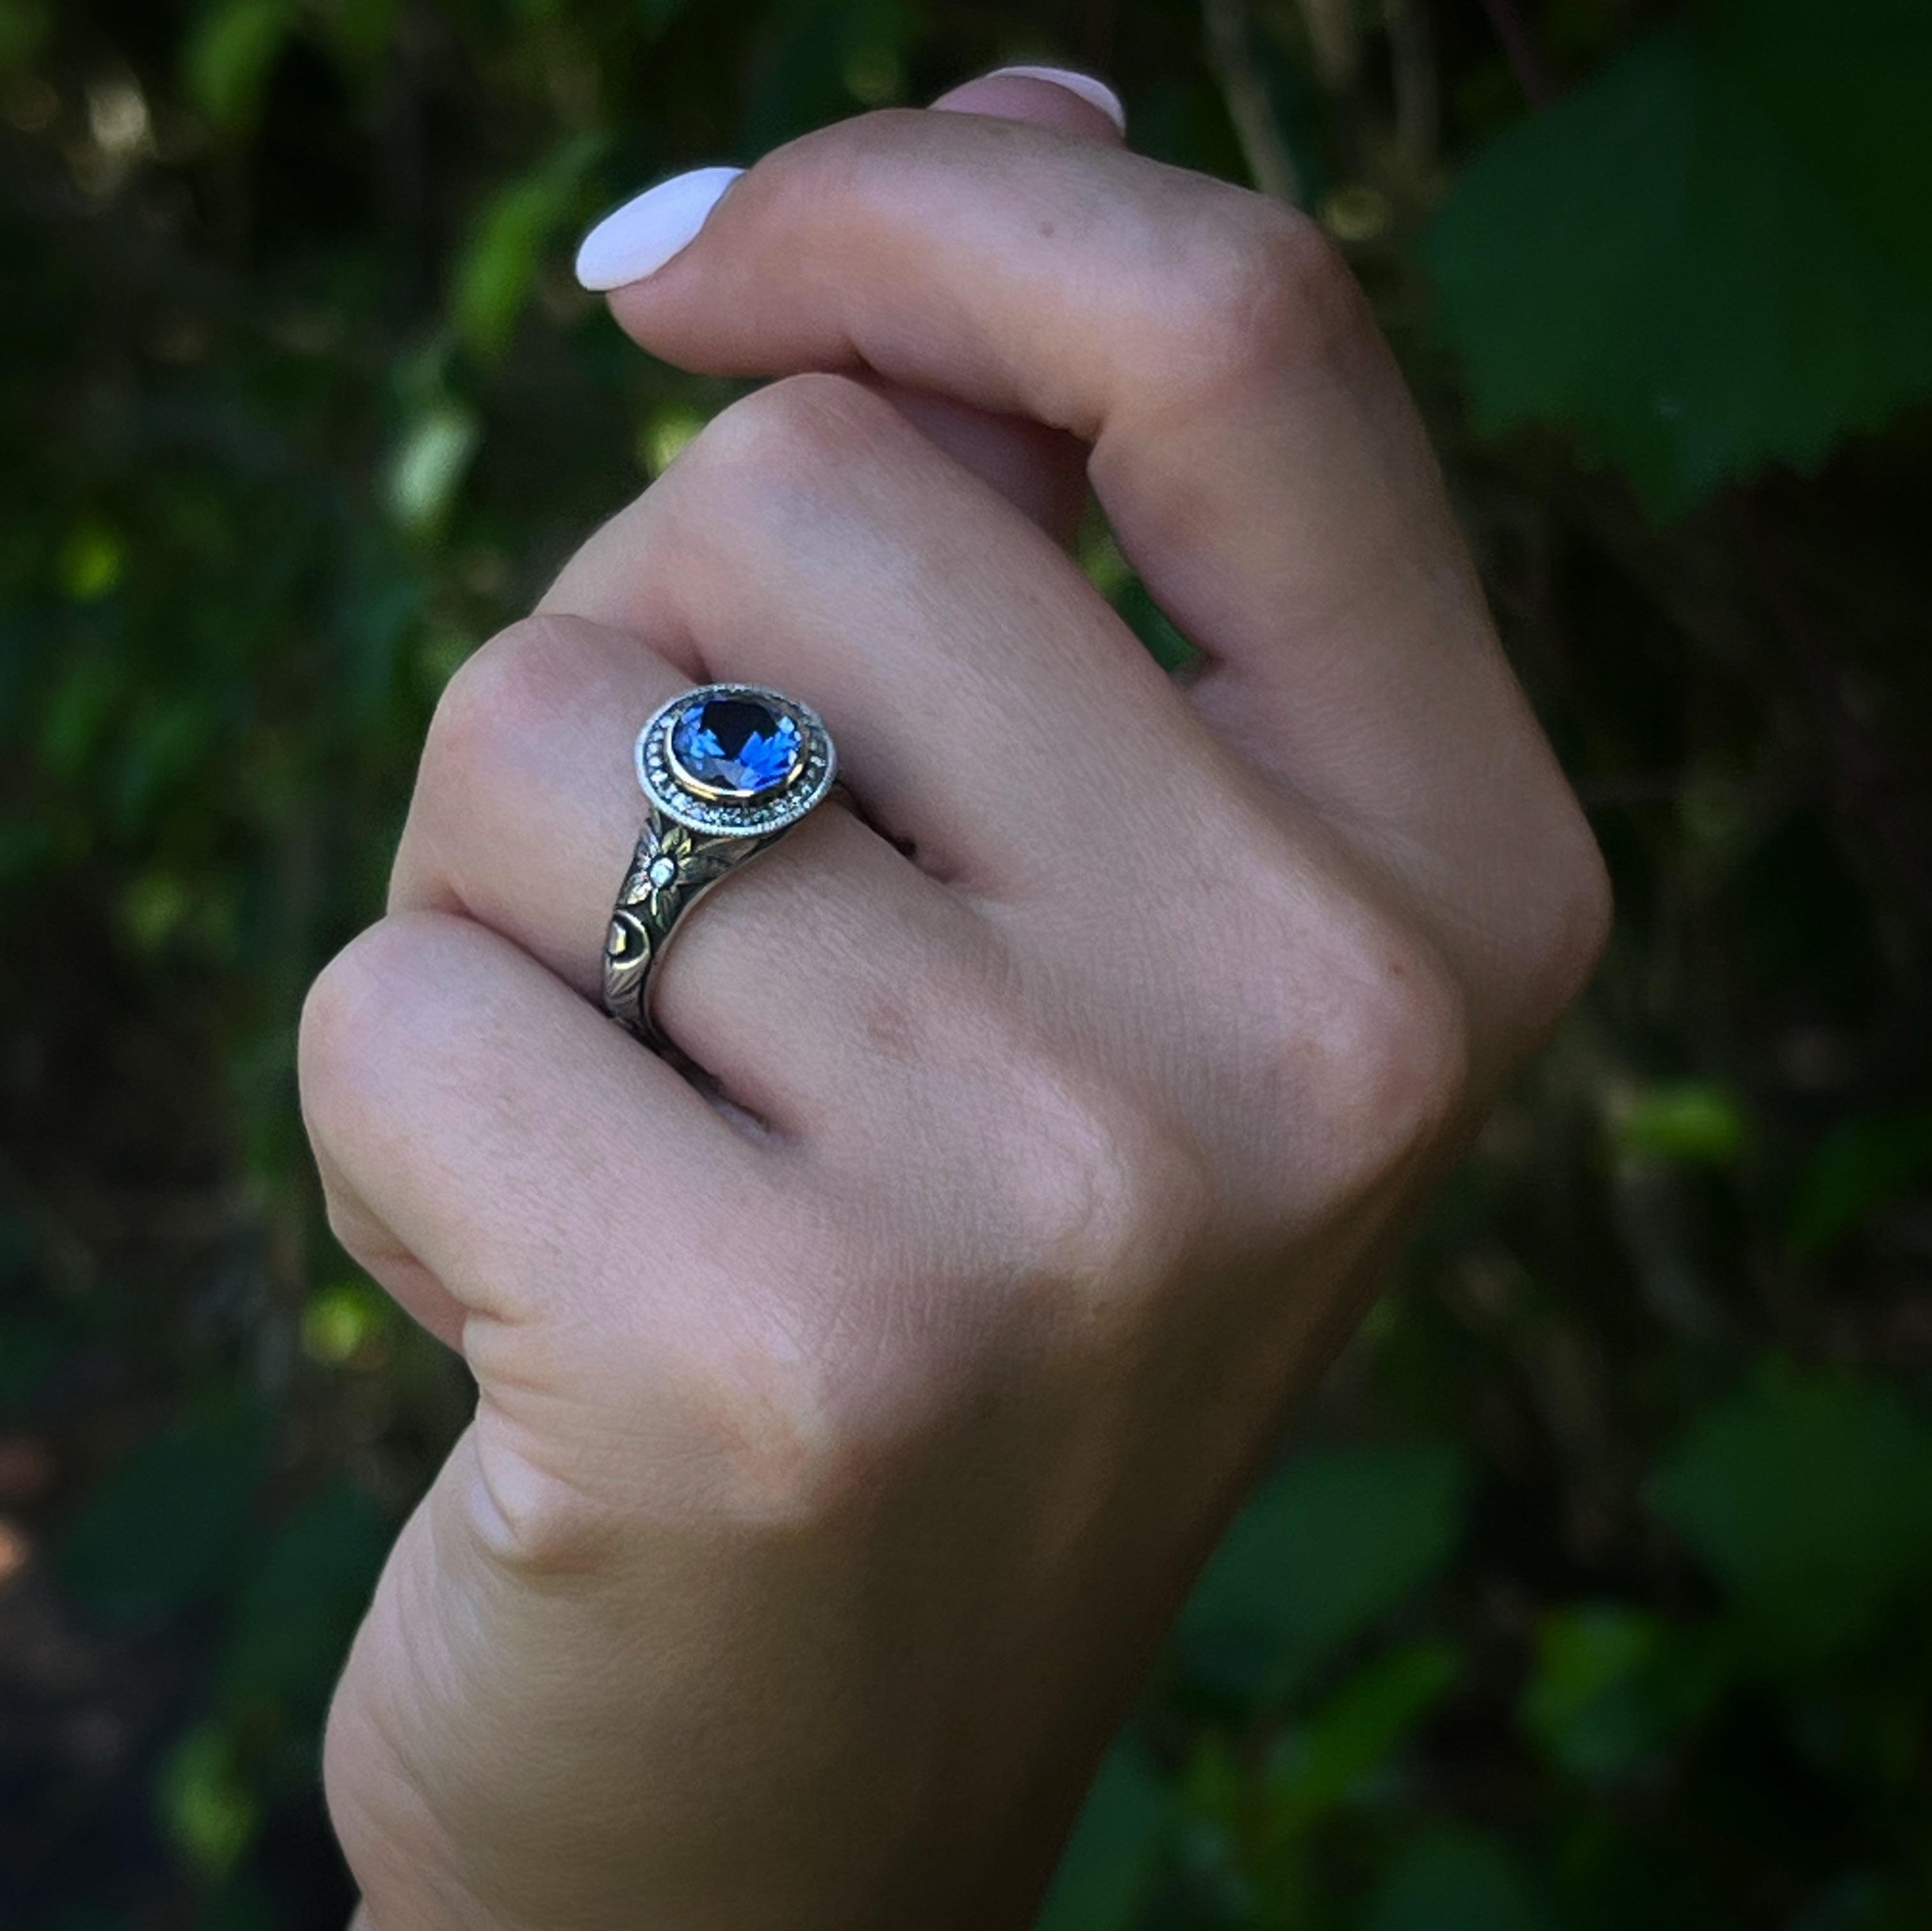 Model Wearing Sapphire Engagement Ring - Embracing the timeless and elegant look.